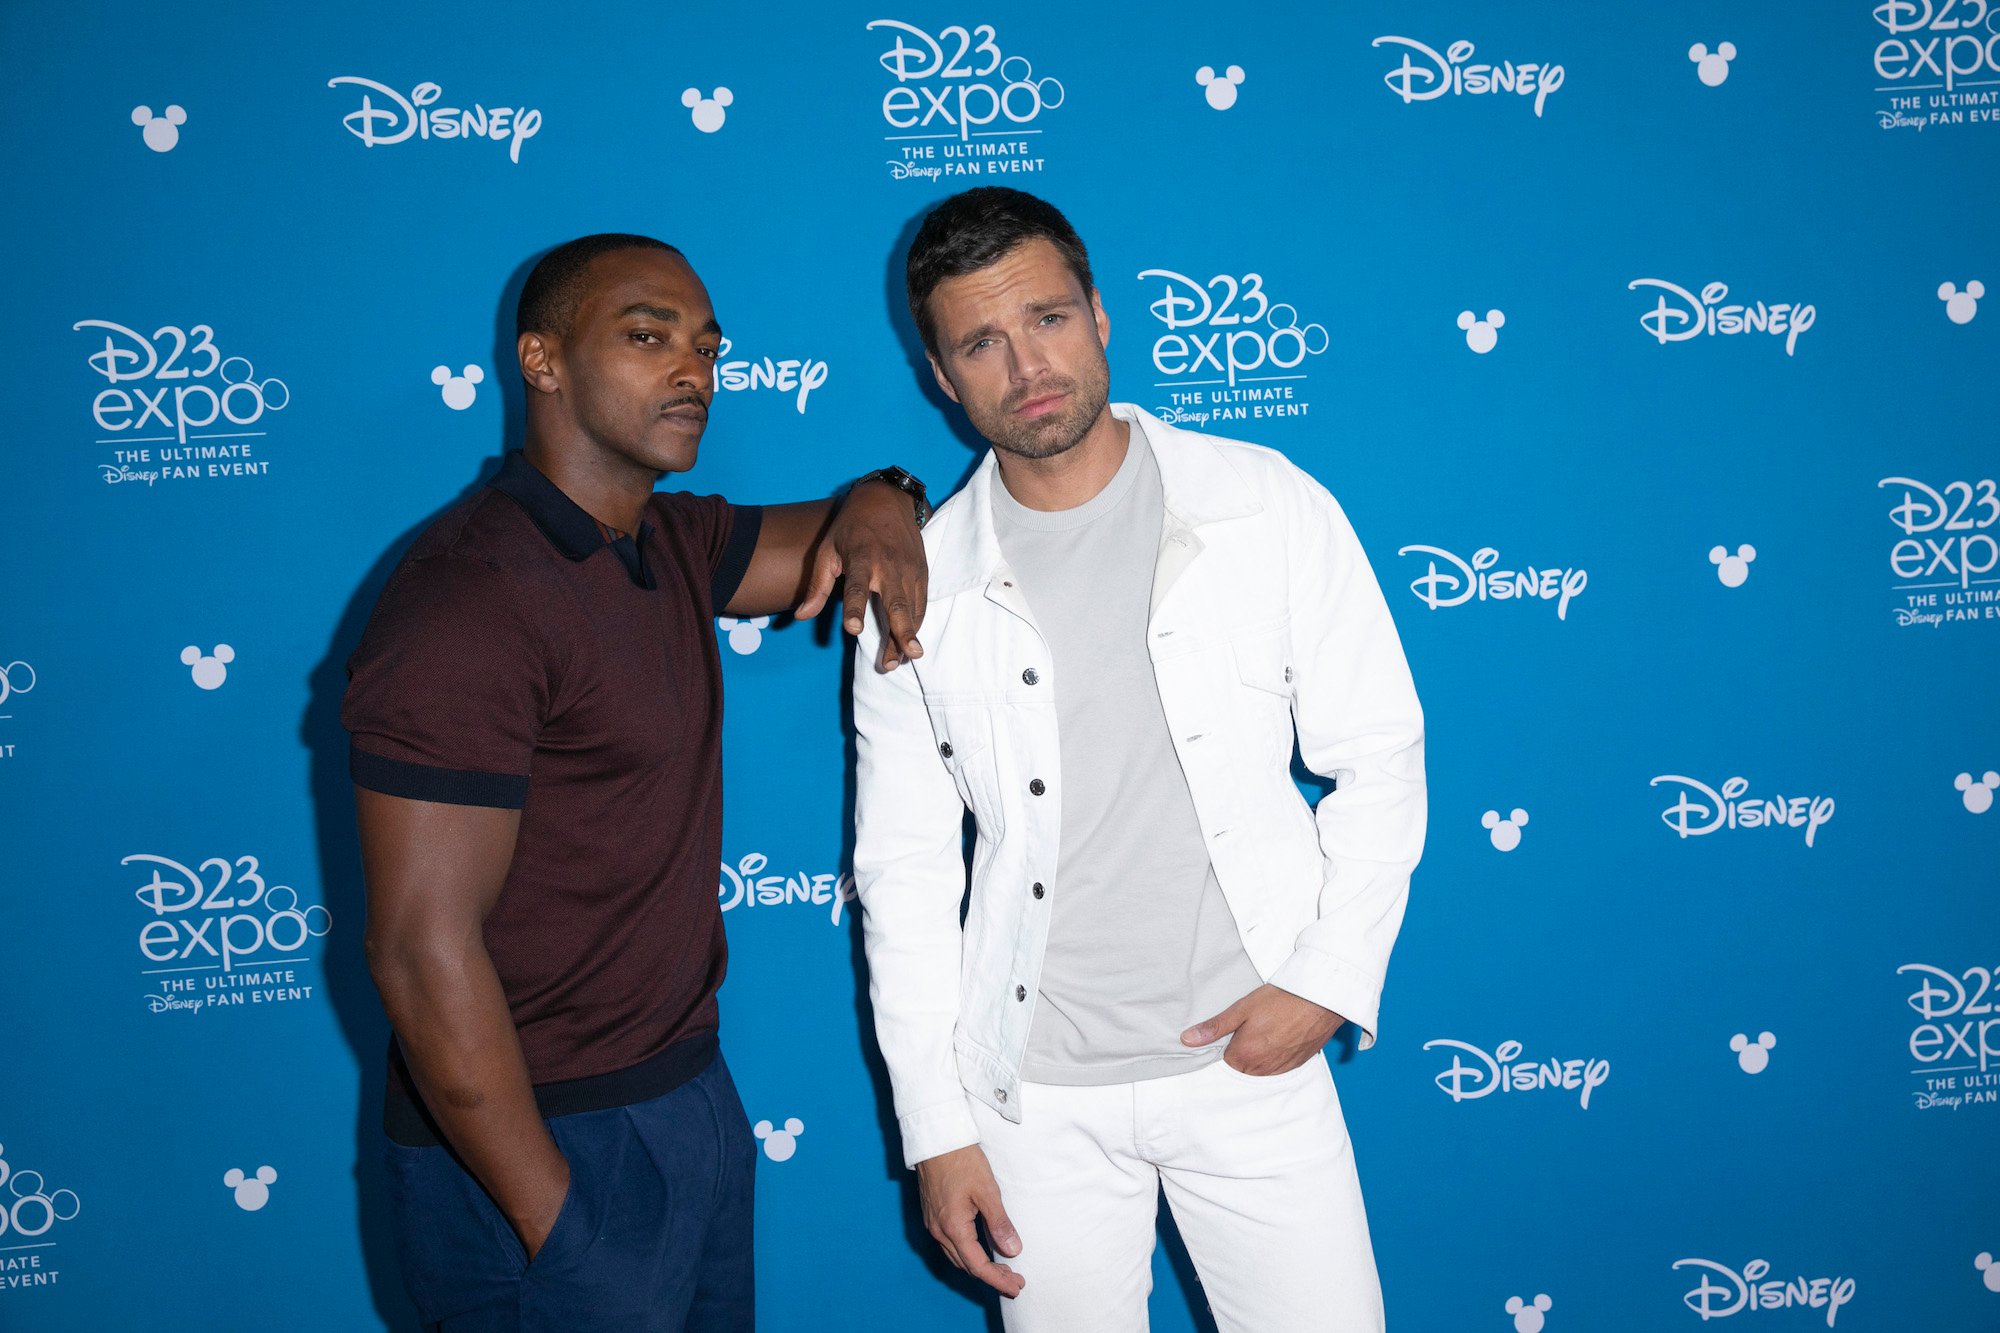 Anthony Mackie leaning on Sebastian Stan, looking at the camera in front of a blue background